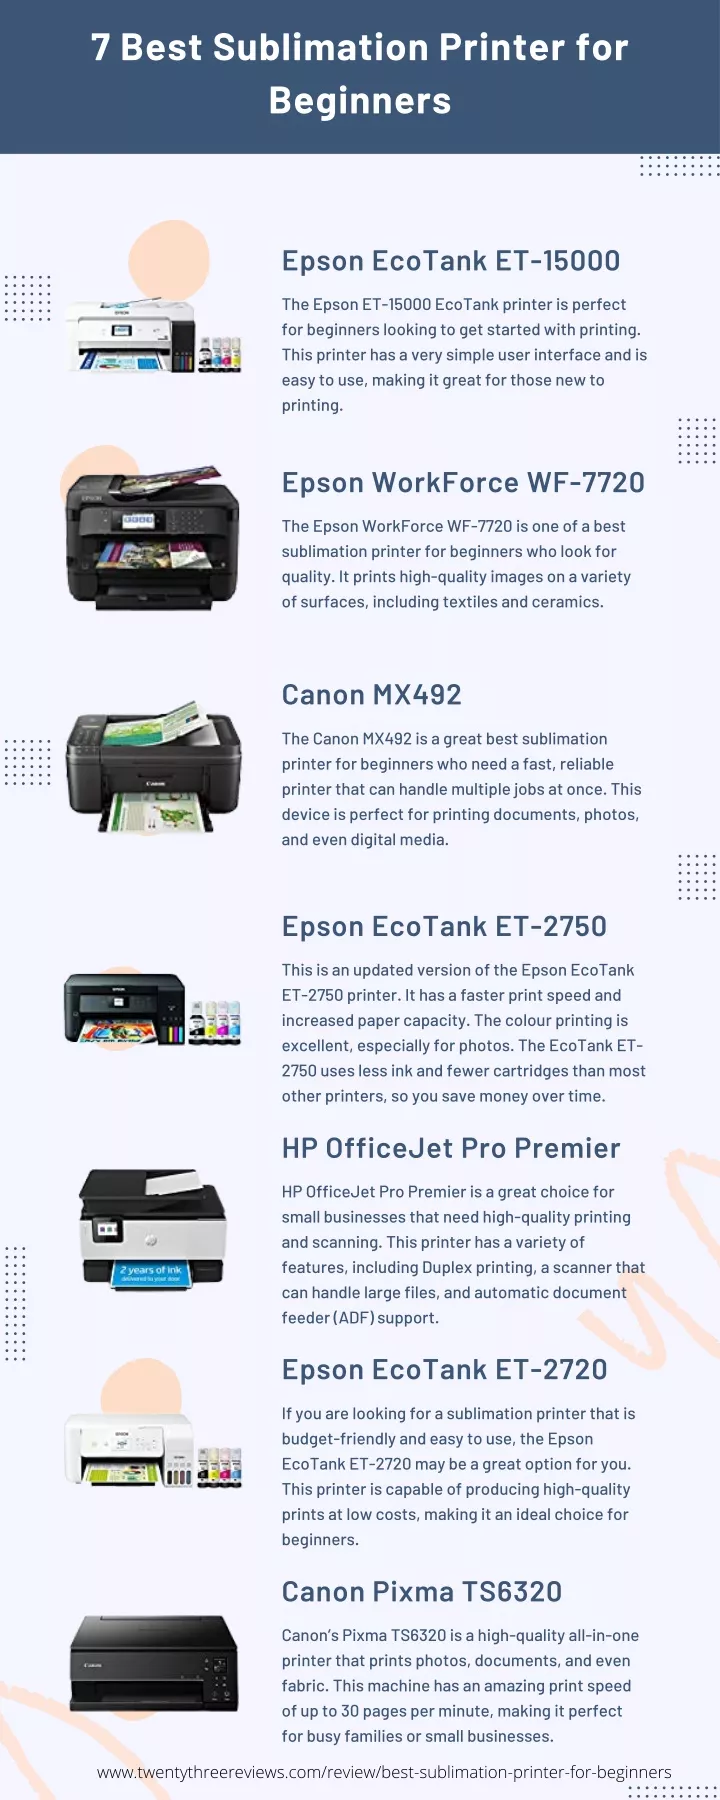 Ppt 7 Best Sublimation Printer For Beginners Powerpoint Presentation Id11449070 4647